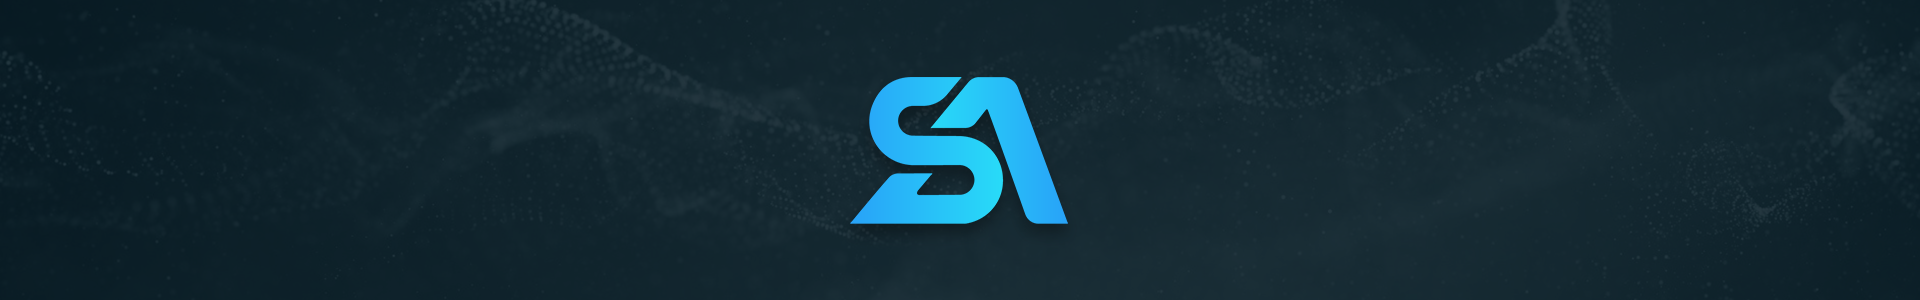 Articles esport STAKRN Agency